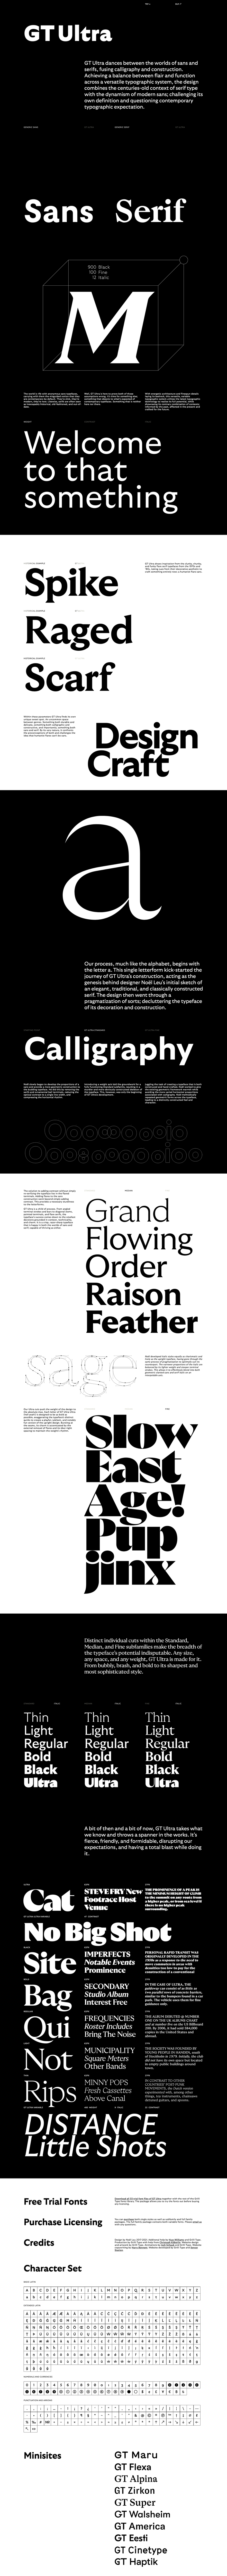 GT Ultra Landing Page Example: Typeface family exclusively at Grilli Type. GT Ultra dances between the worlds of sans and serifs, fusing calligraphy and construction. Achieving a balance between flair and function across a versatile typographic system, the design combines the centuries-old context of serif type with the dynamism of modern sans; challenging its own definition and questioning contemporary typographic expectation.